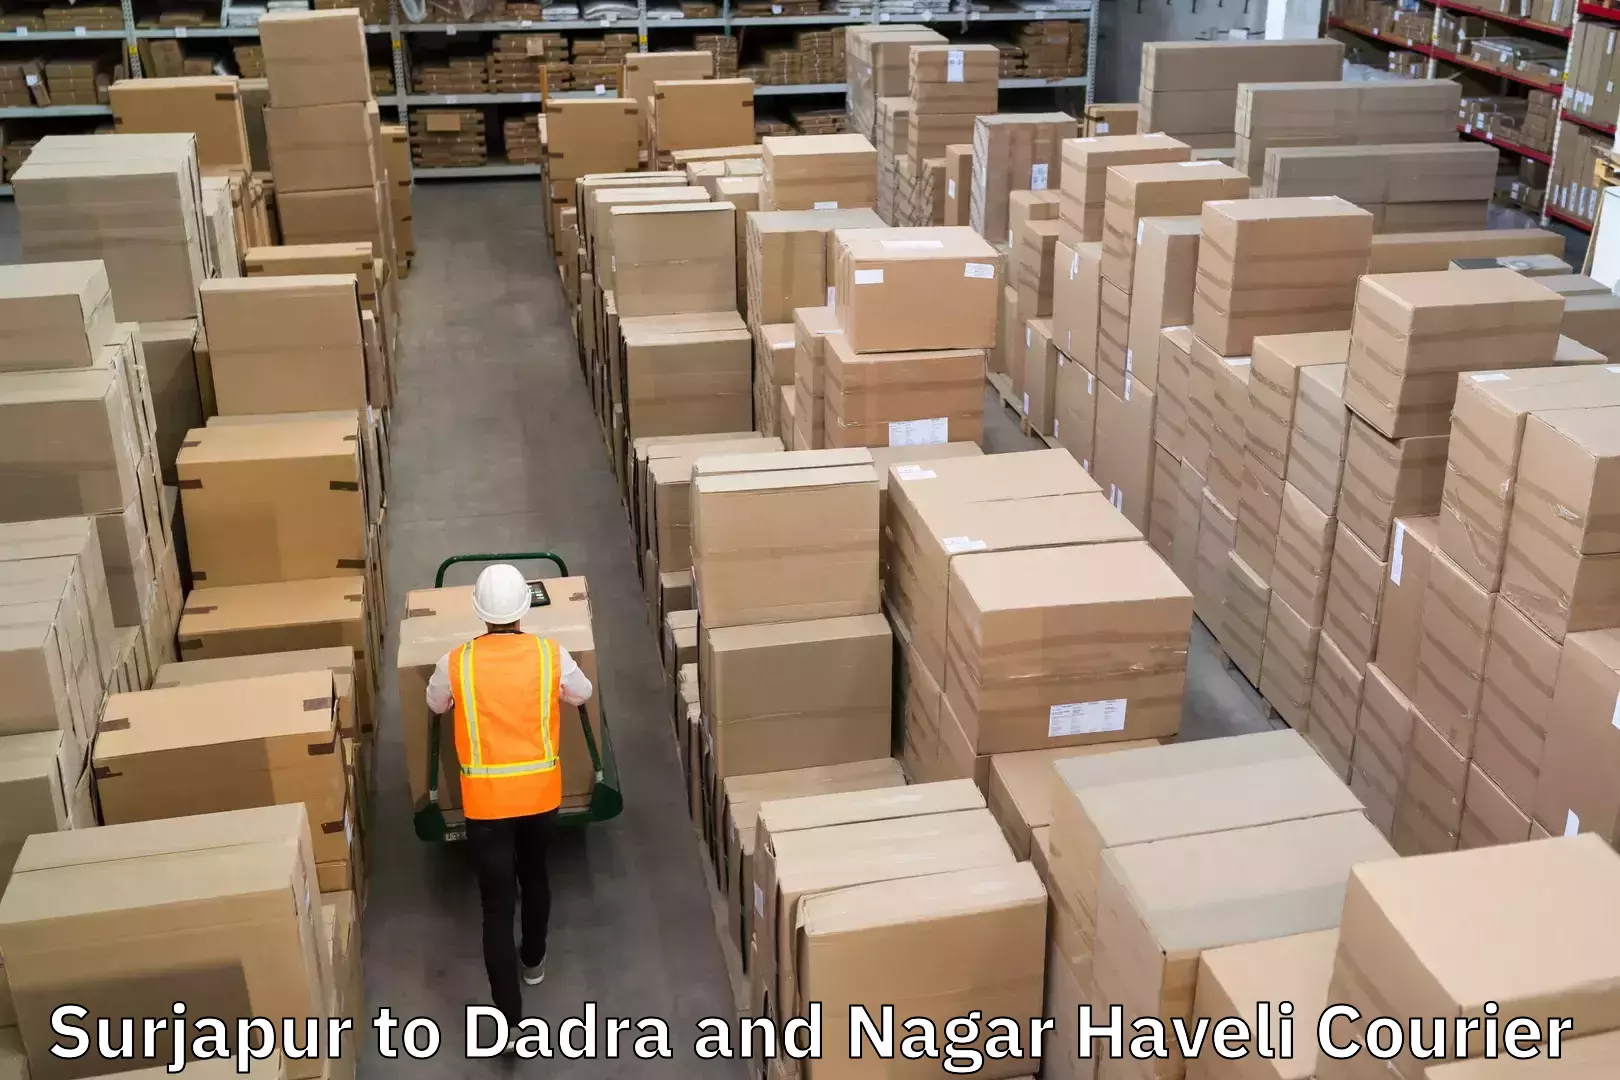 State-of-the-art courier technology in Surjapur to Dadra and Nagar Haveli